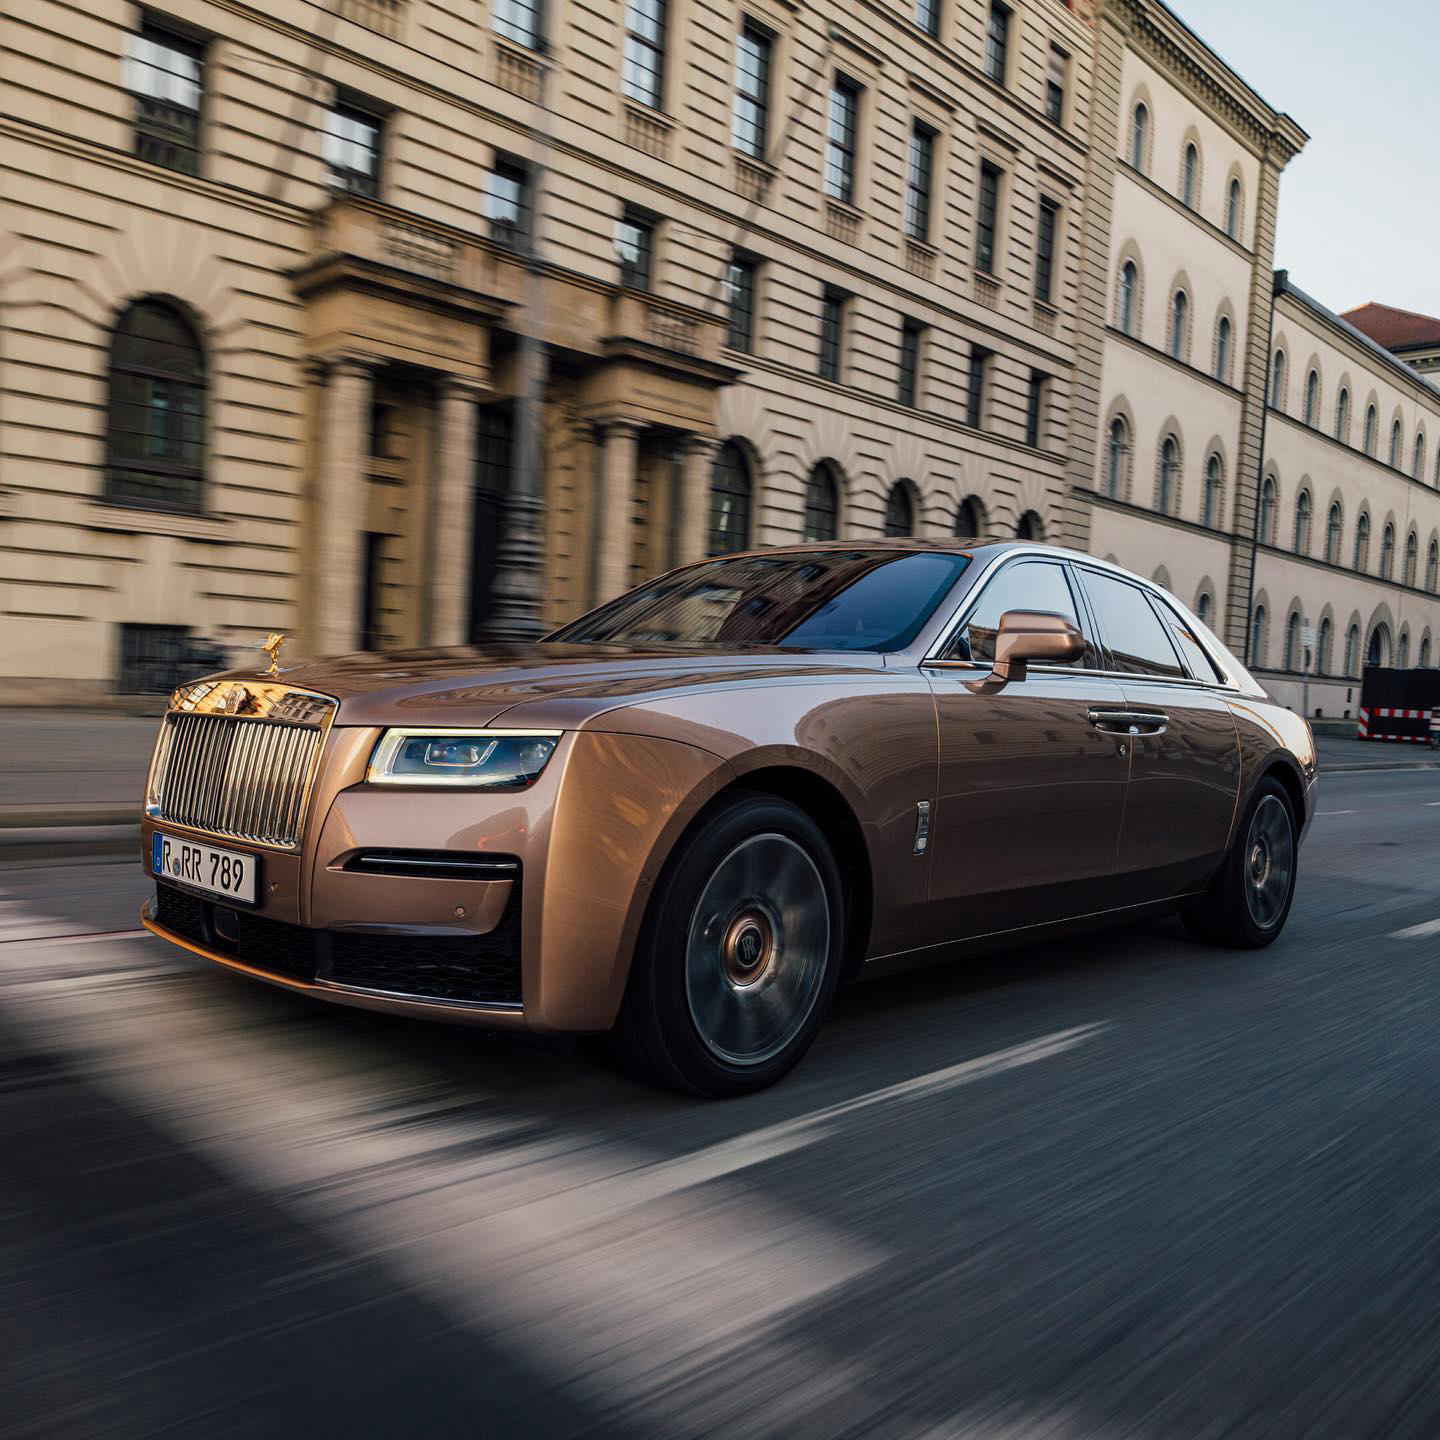 image  1 Rolls-Royce Motor Cars - Driving with effortless grace, this #Bespoke Ghost in Petra Gold exudes ele